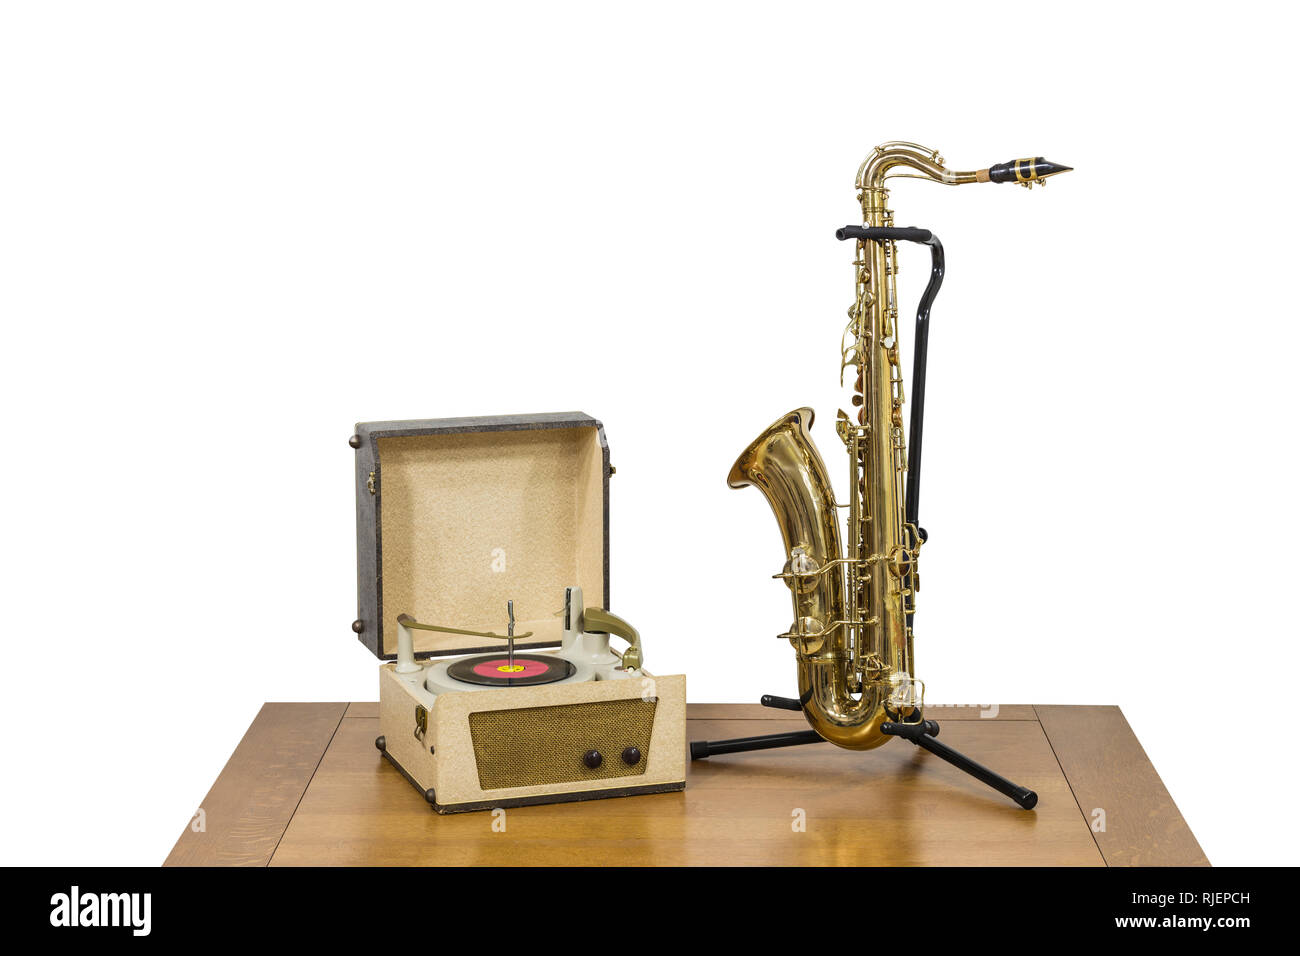 Old record player and saxophone on wood table isolated on white. Stock Photo